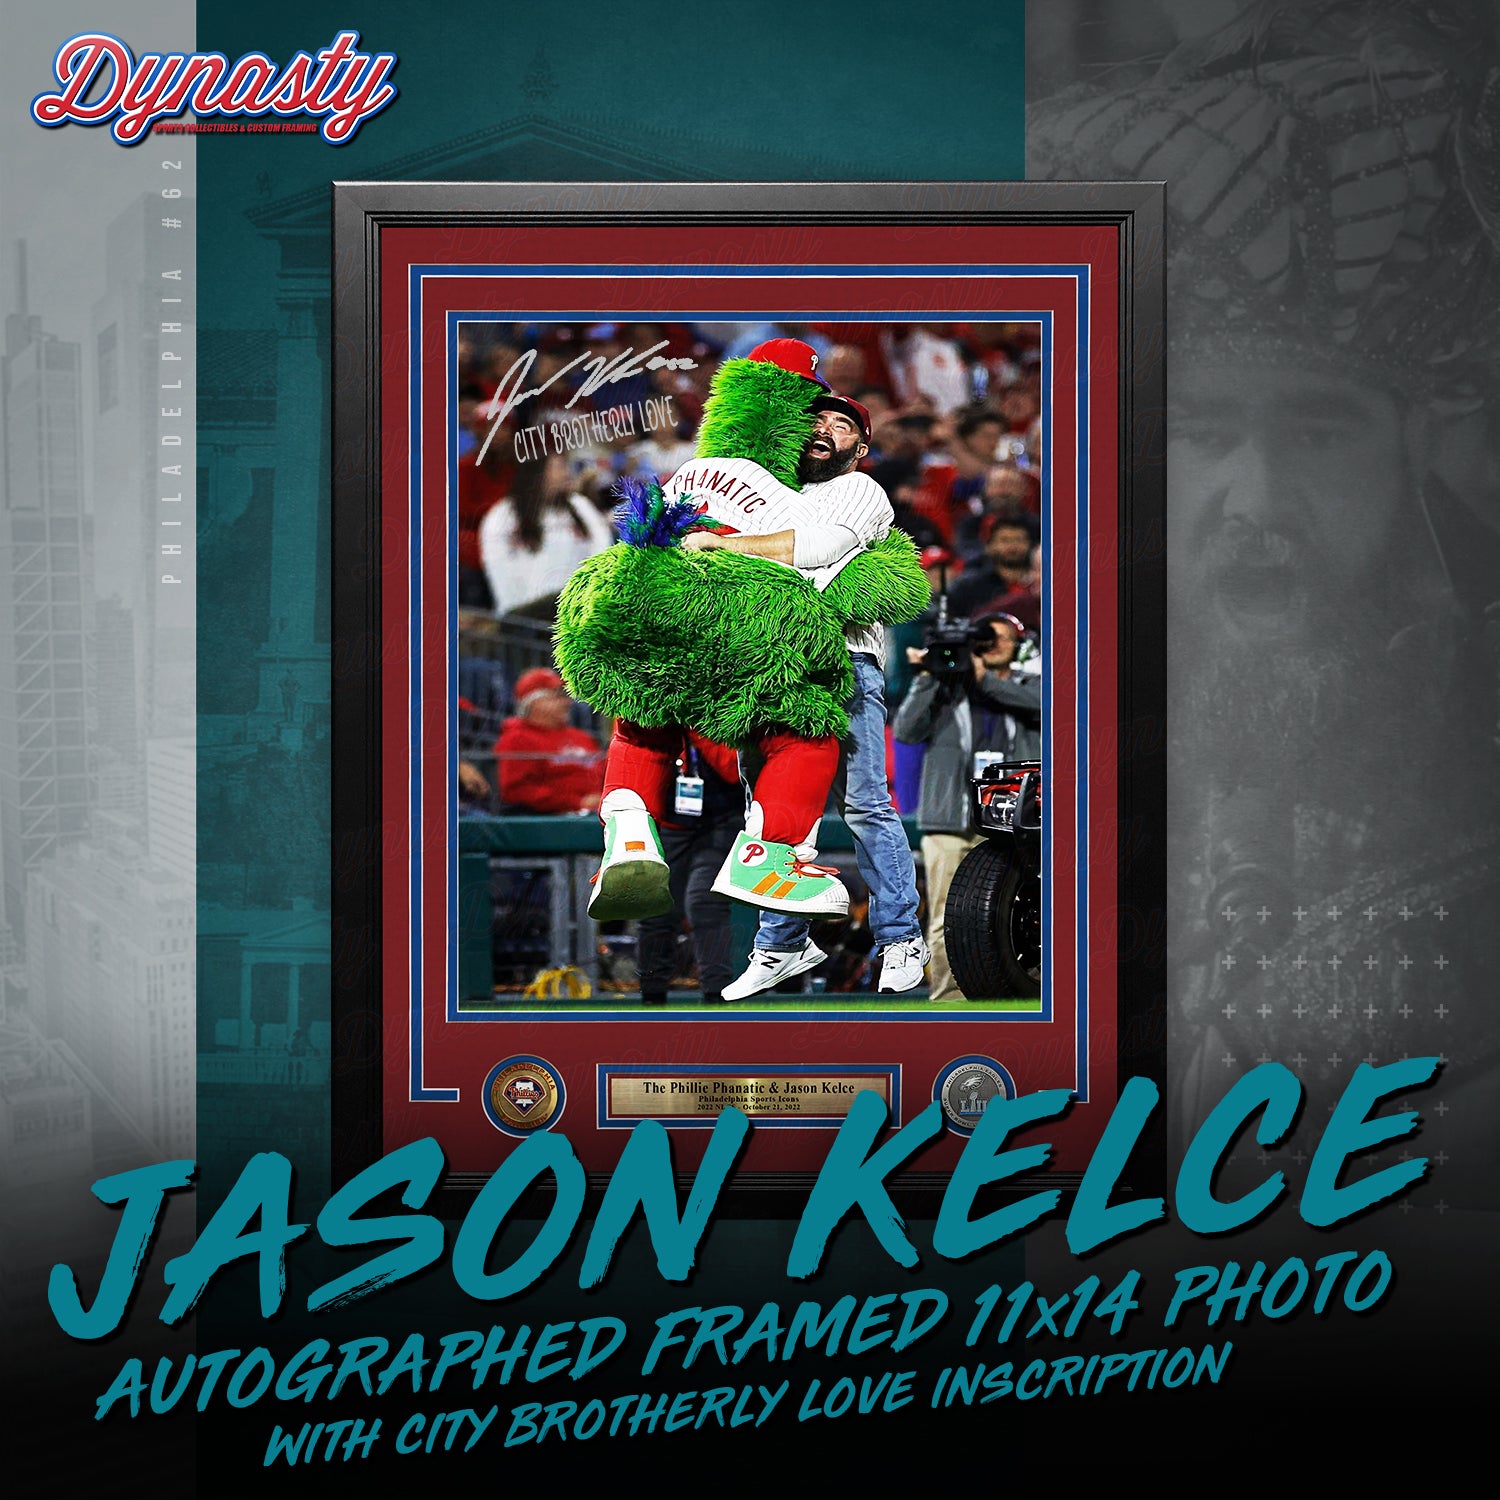 Jason Kelce Celebrates with The Phillie Phanatic NLCS Autographed Framed Photo | Pre-Sale Opportunity - Dynasty Sports & Framing 